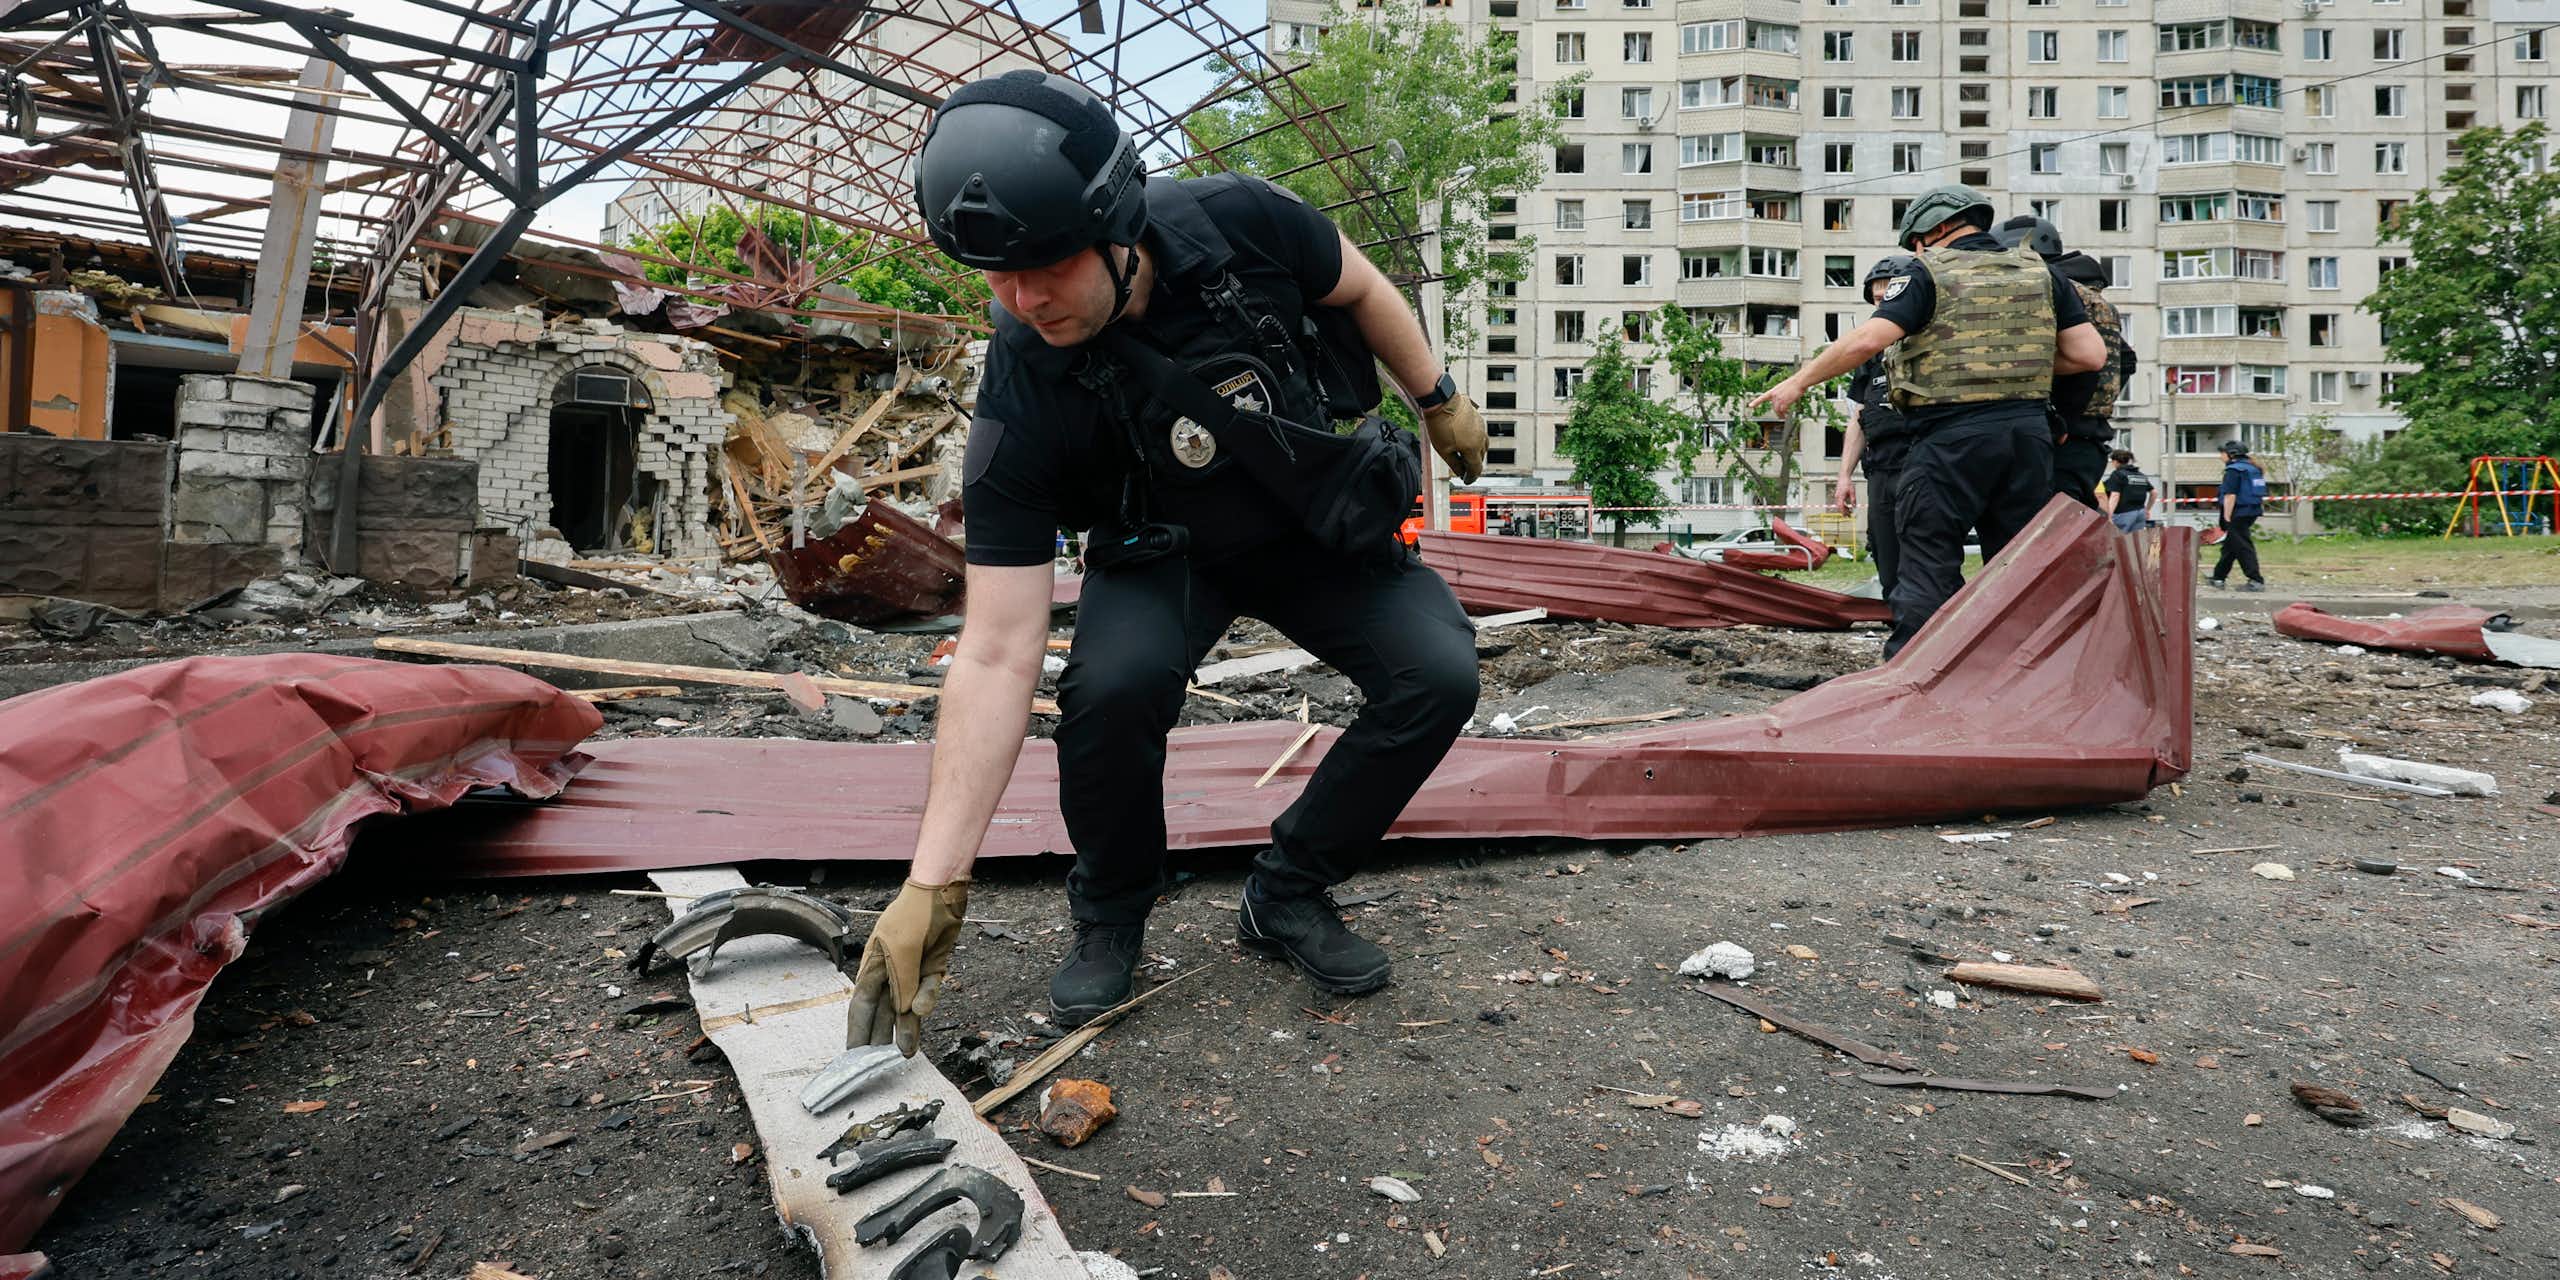 Ukrainian security forces examine the aftermath of a Russian airstrike in Kharkiv, northern Ukraine.